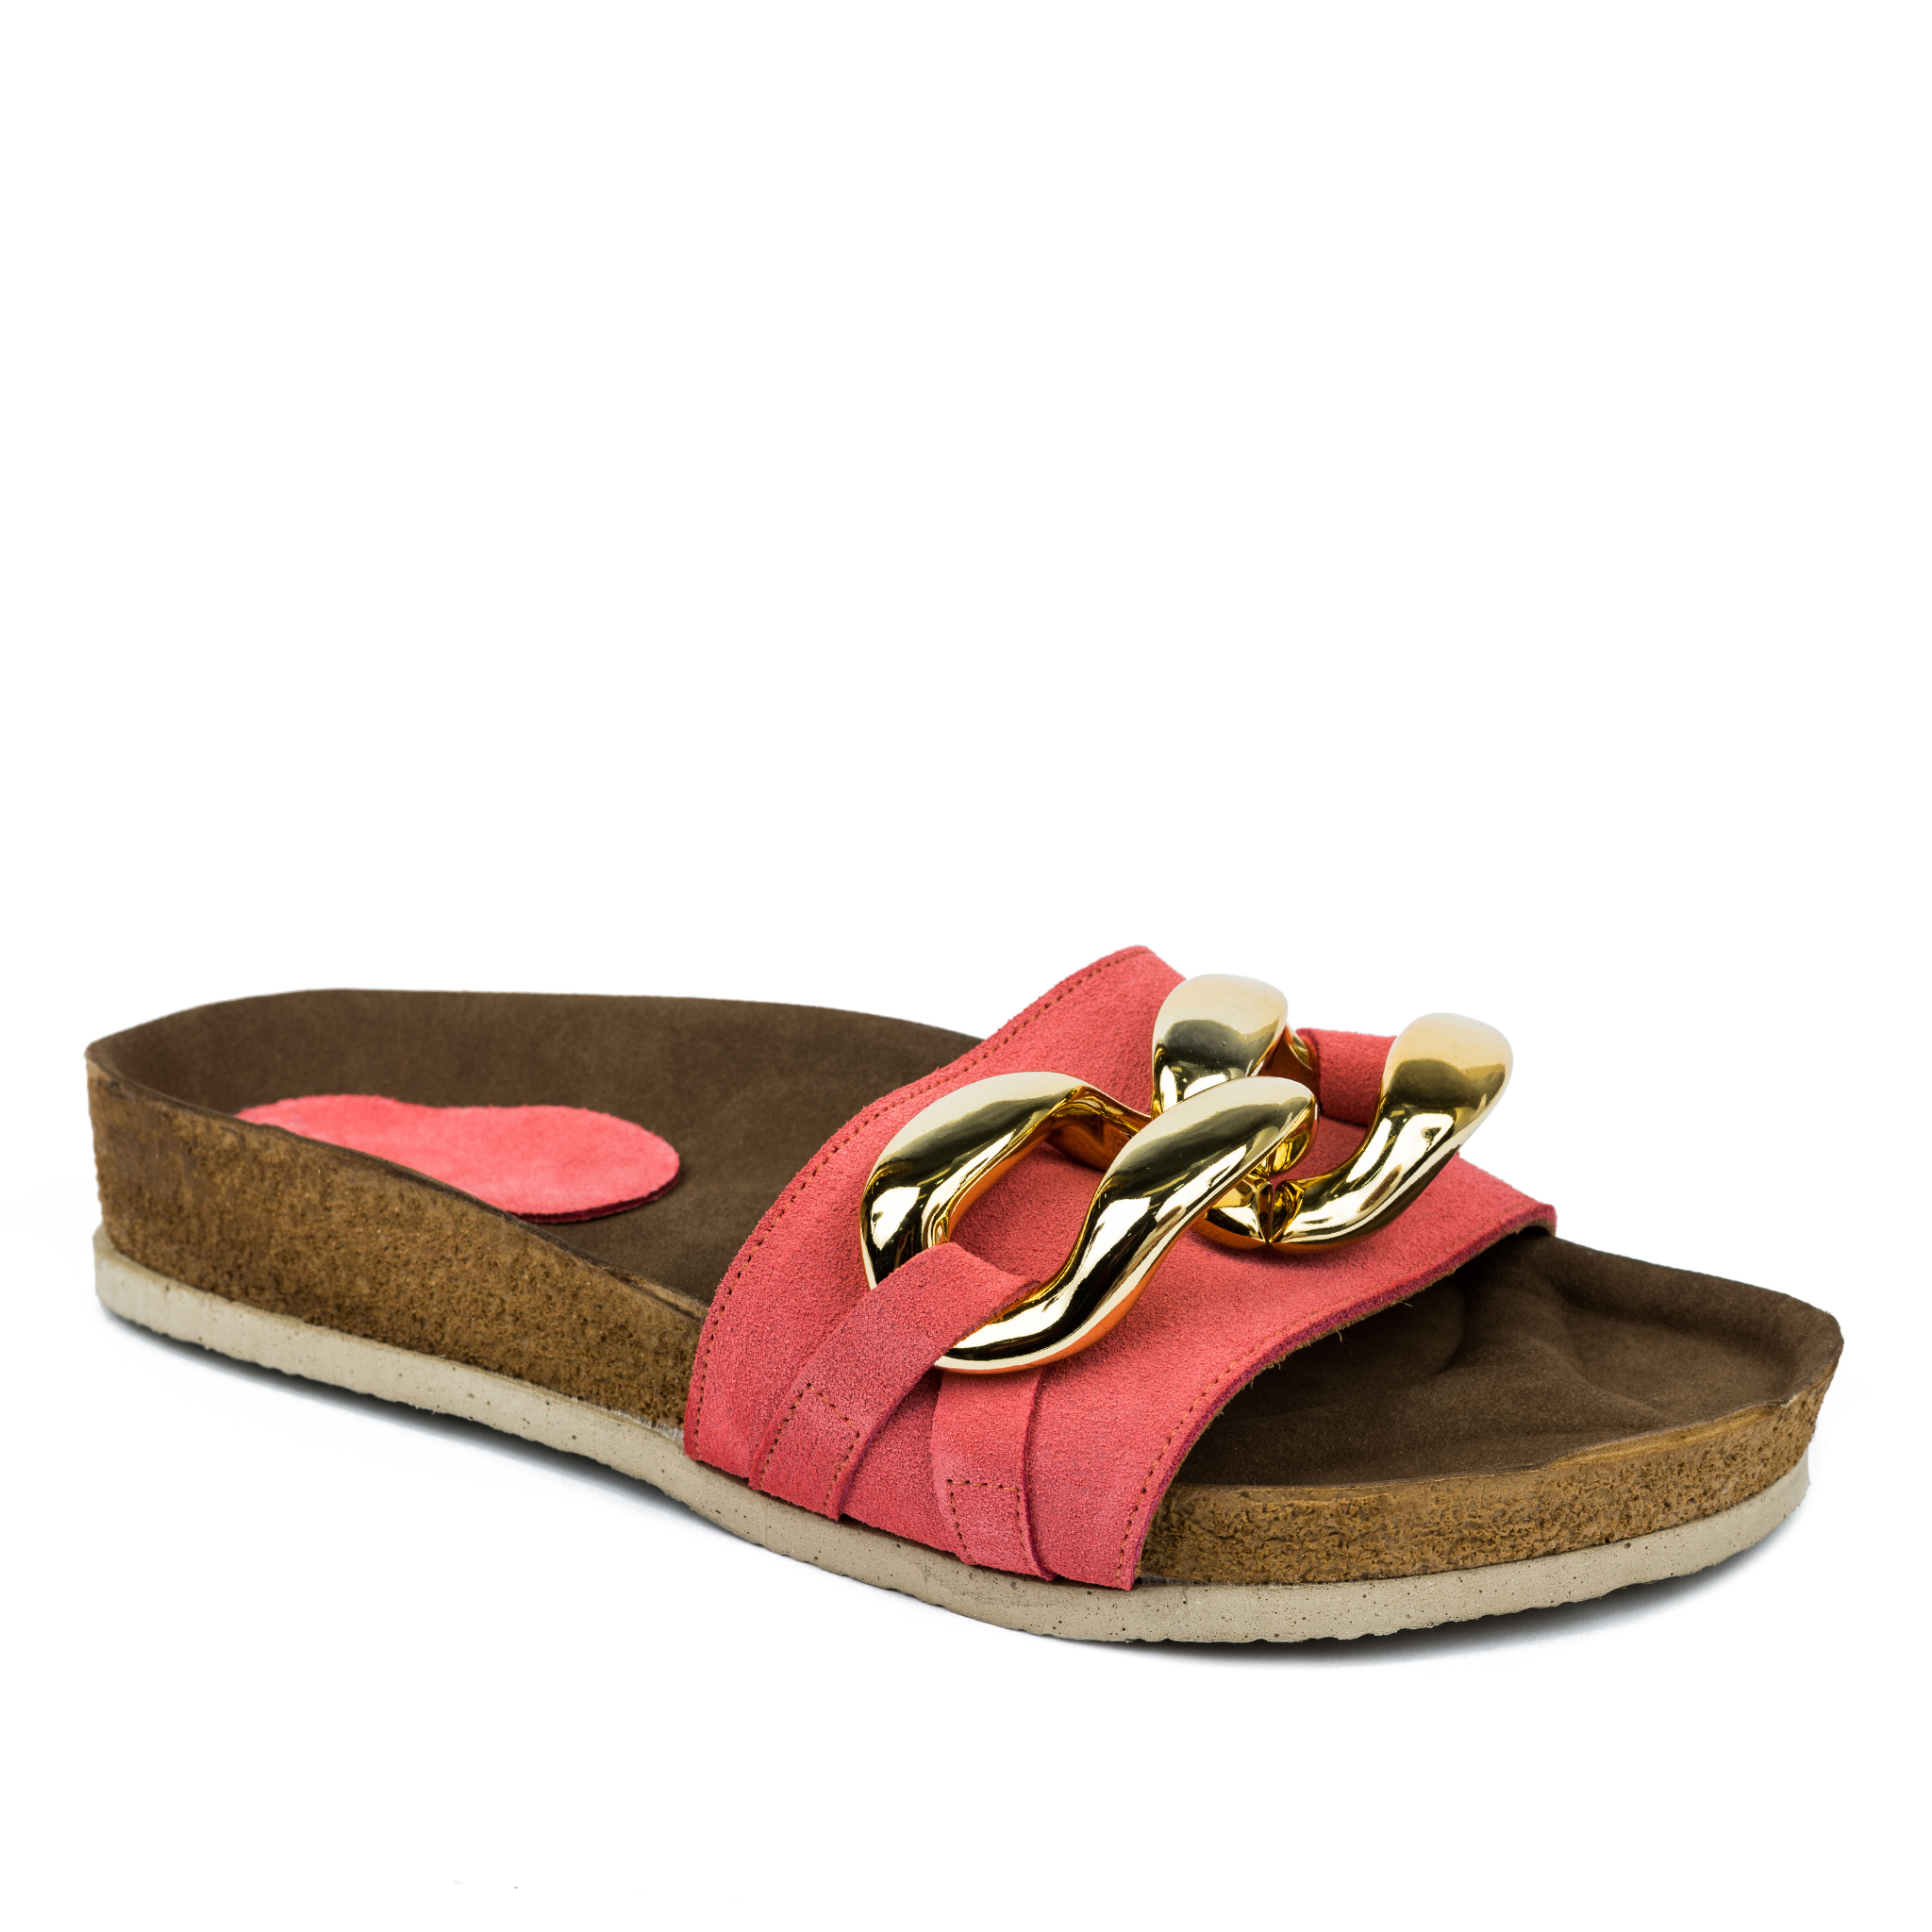 Leather slippers A741 - CORAL